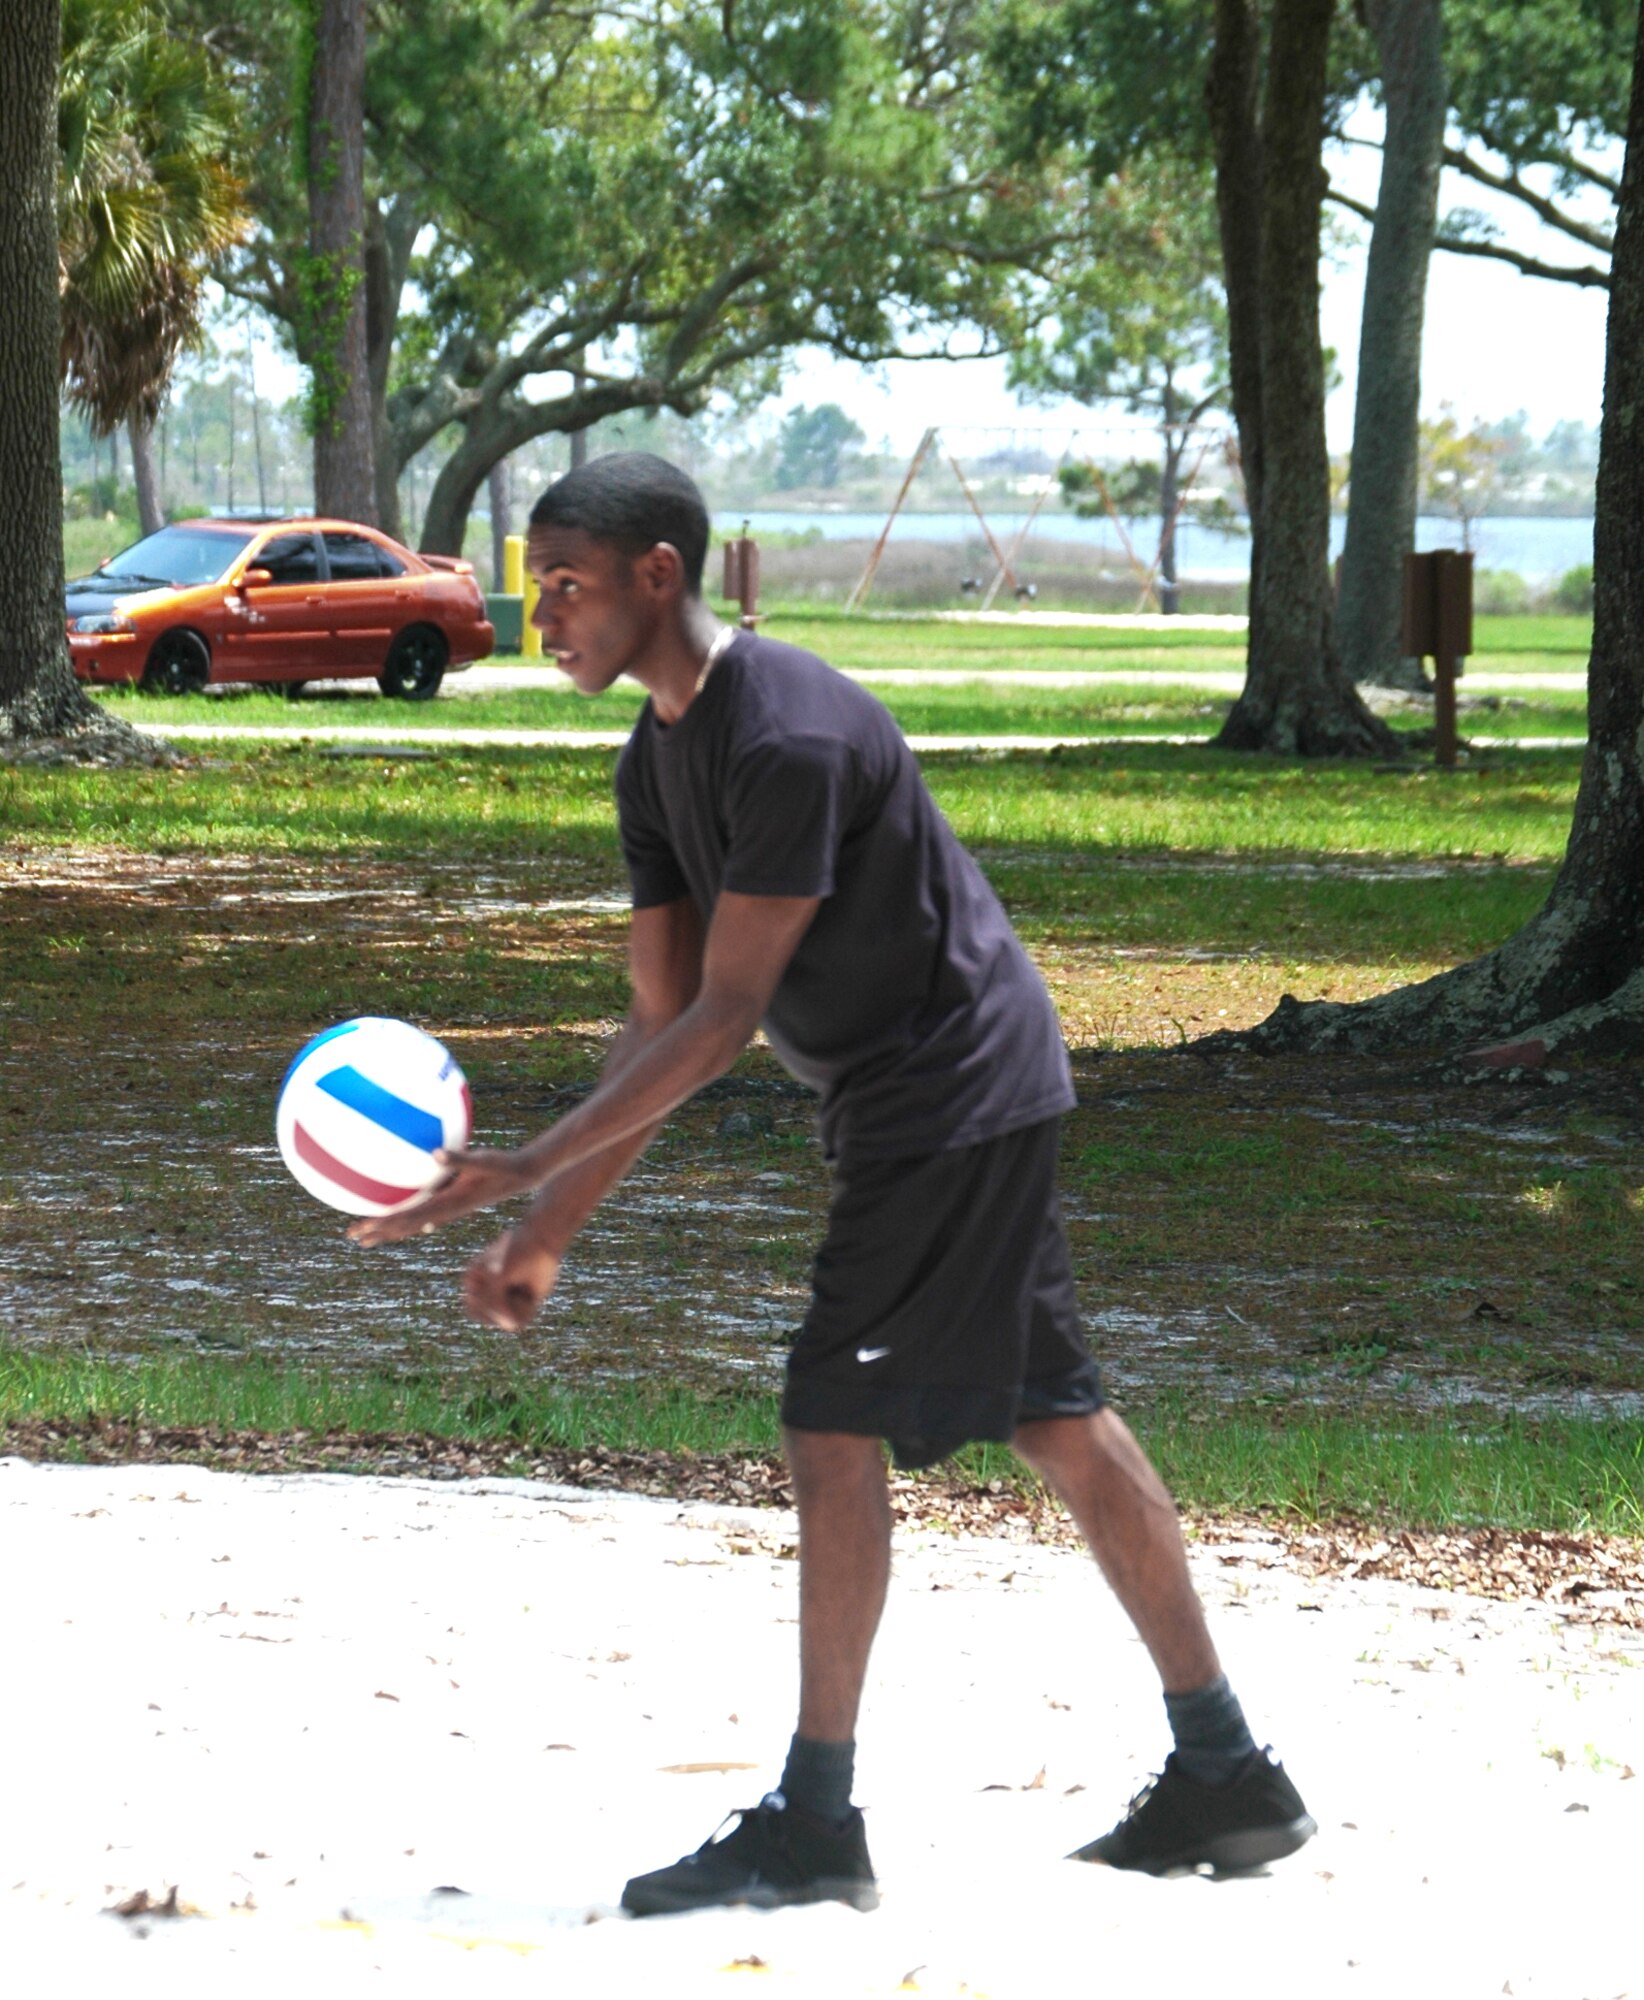 Airman 1st Class Denton Williams prepares to serve during a volleyball game at Heritage Park May 5 in Tyndall Air Force Base, Fla. The volleyball game was hosted by 325th Security Forces Squadron members to provide some extracurricular activity for 10 youths going through rehabilitation at the Liberty Unit for Specialized Treatment program located in Bristol, Fla. Airman Williams is assigned to the 325th SFS. (U.S. Air Force photo/Staff Sgt. Joshua Stevens) 
